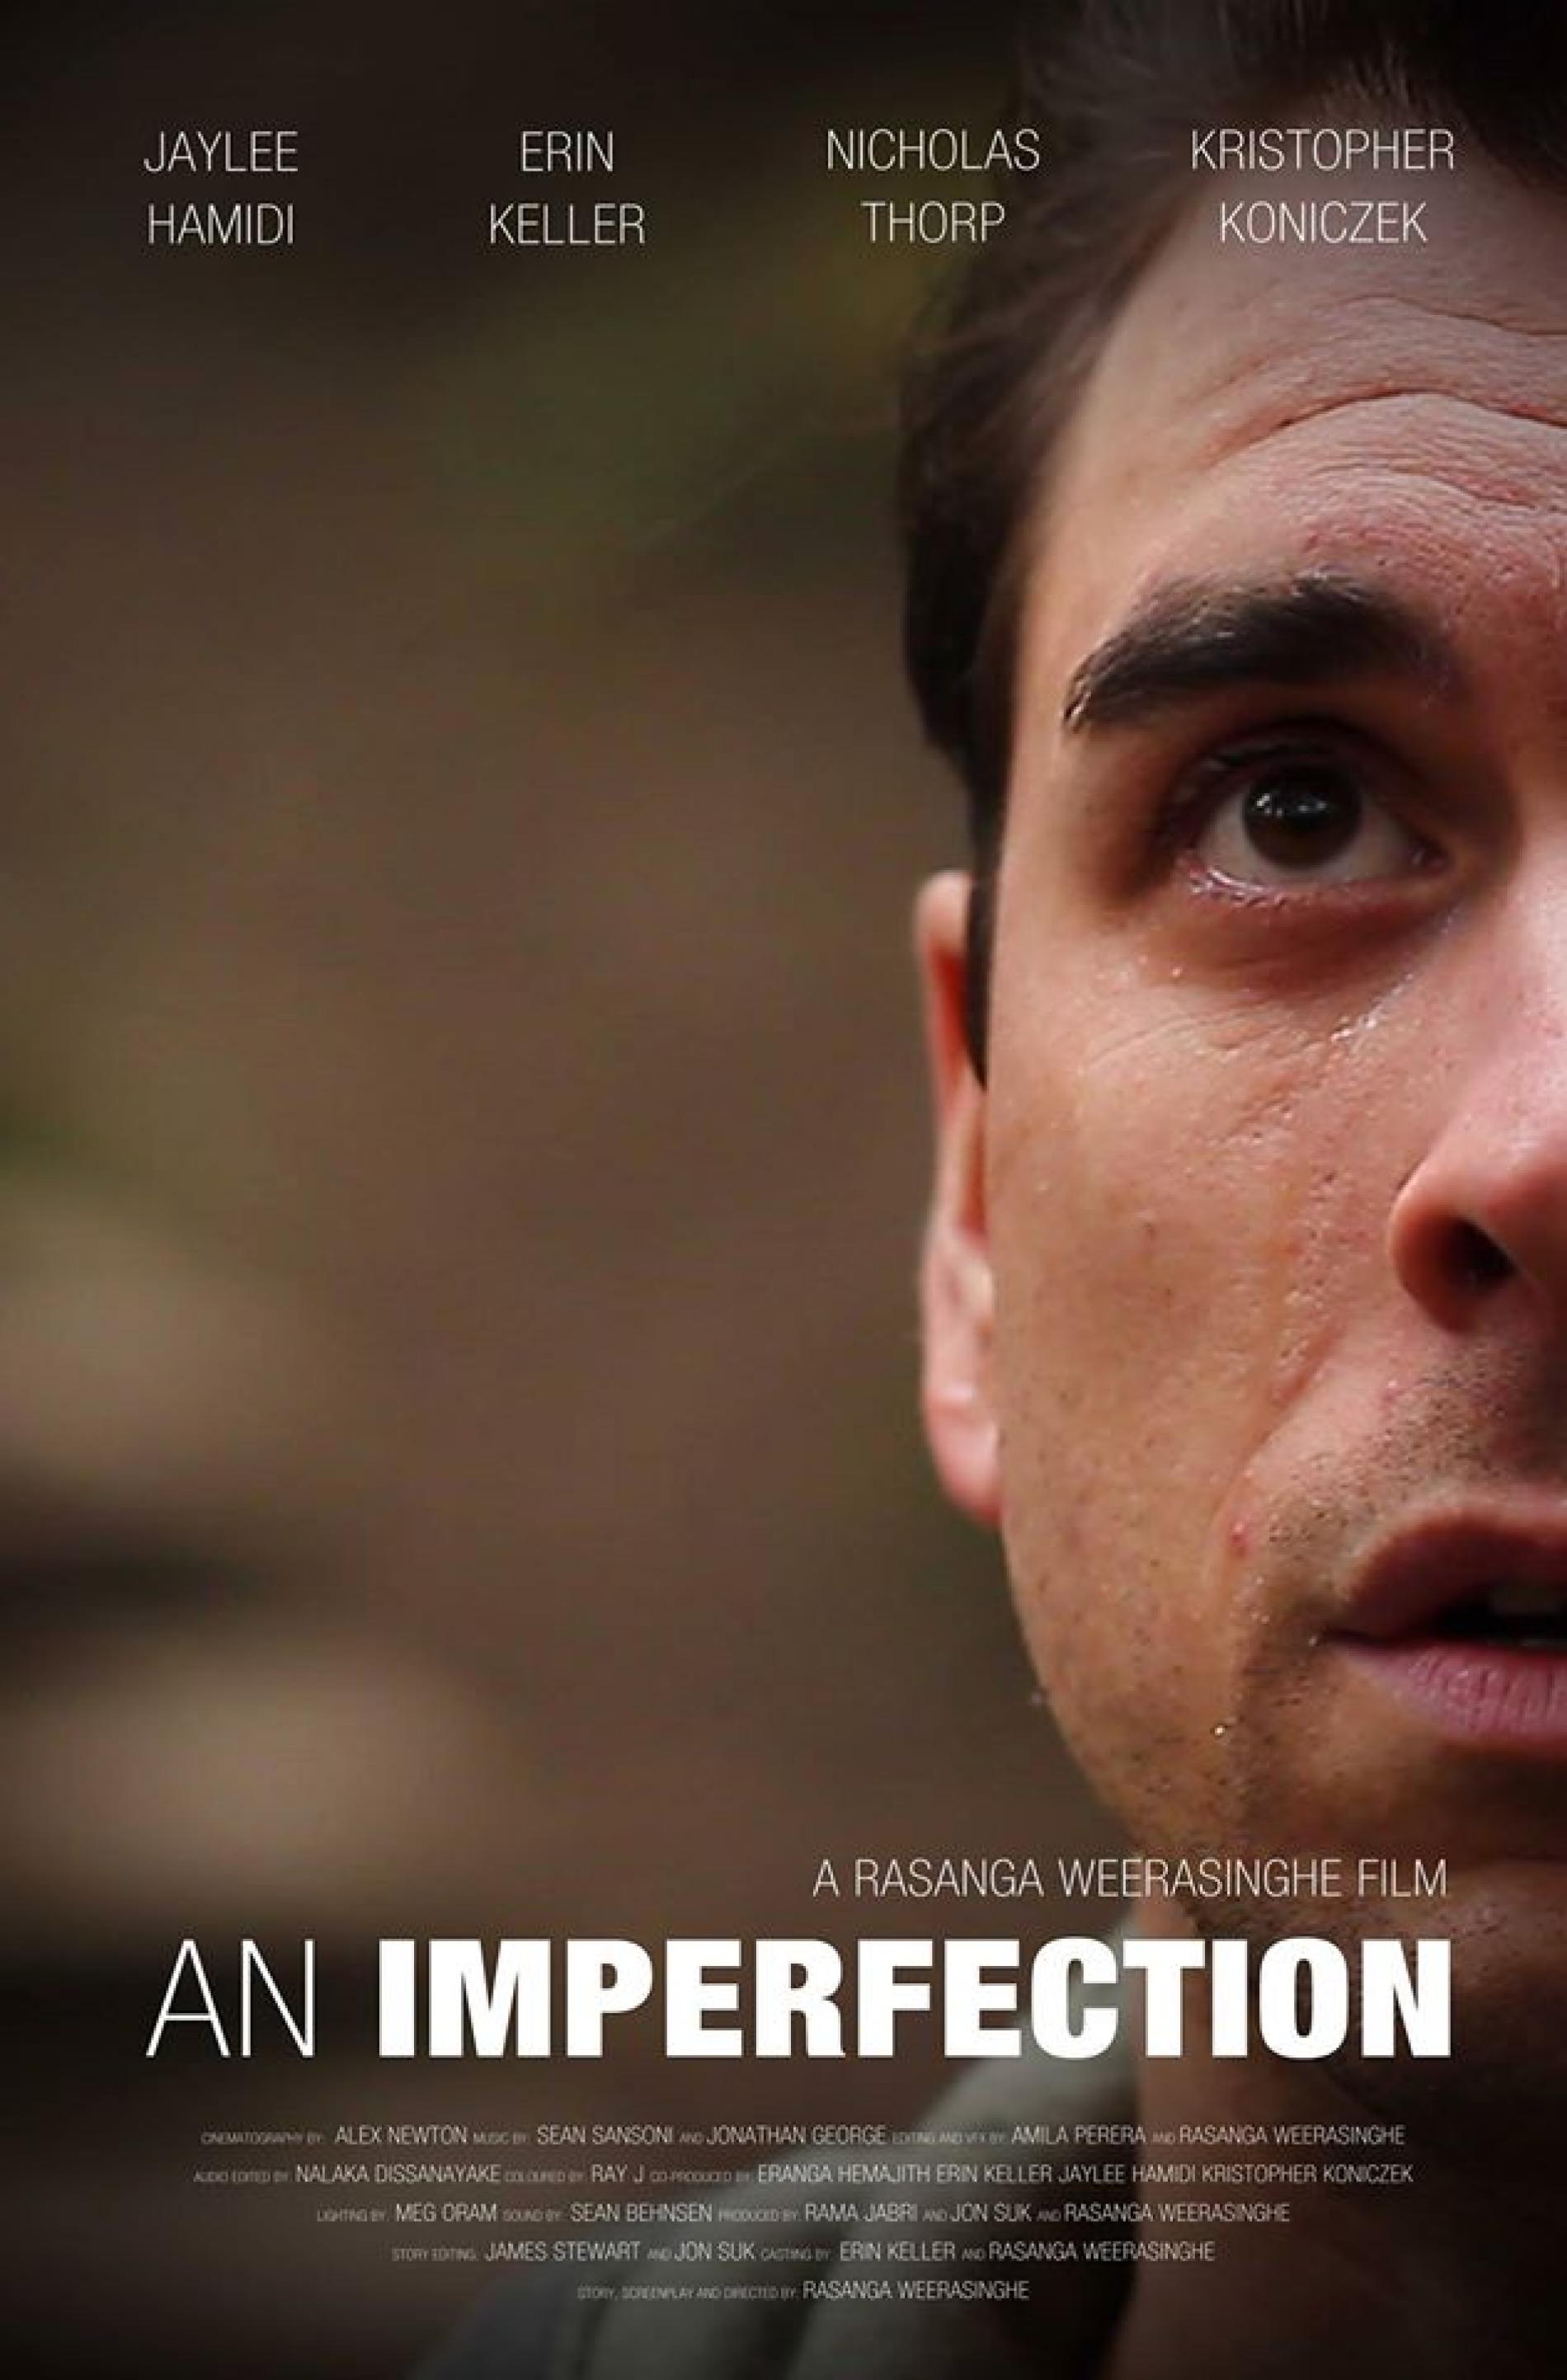 An Imperfection: The Movie